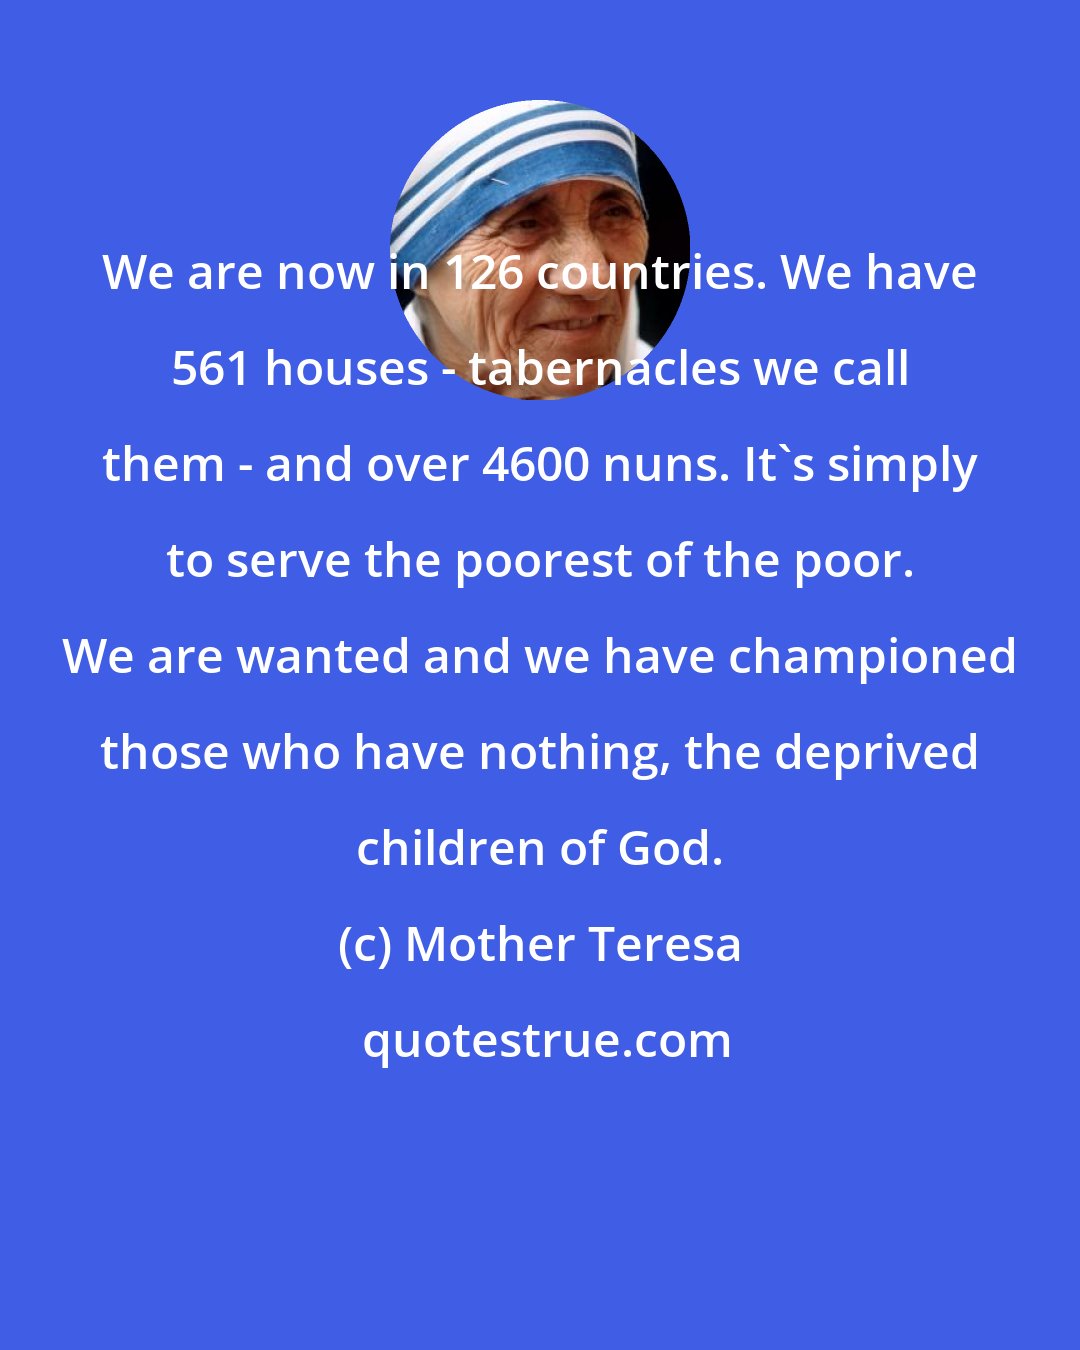 Mother Teresa: We are now in 126 countries. We have 561 houses - tabernacles we call them - and over 4600 nuns. It's simply to serve the poorest of the poor. We are wanted and we have championed those who have nothing, the deprived children of God.